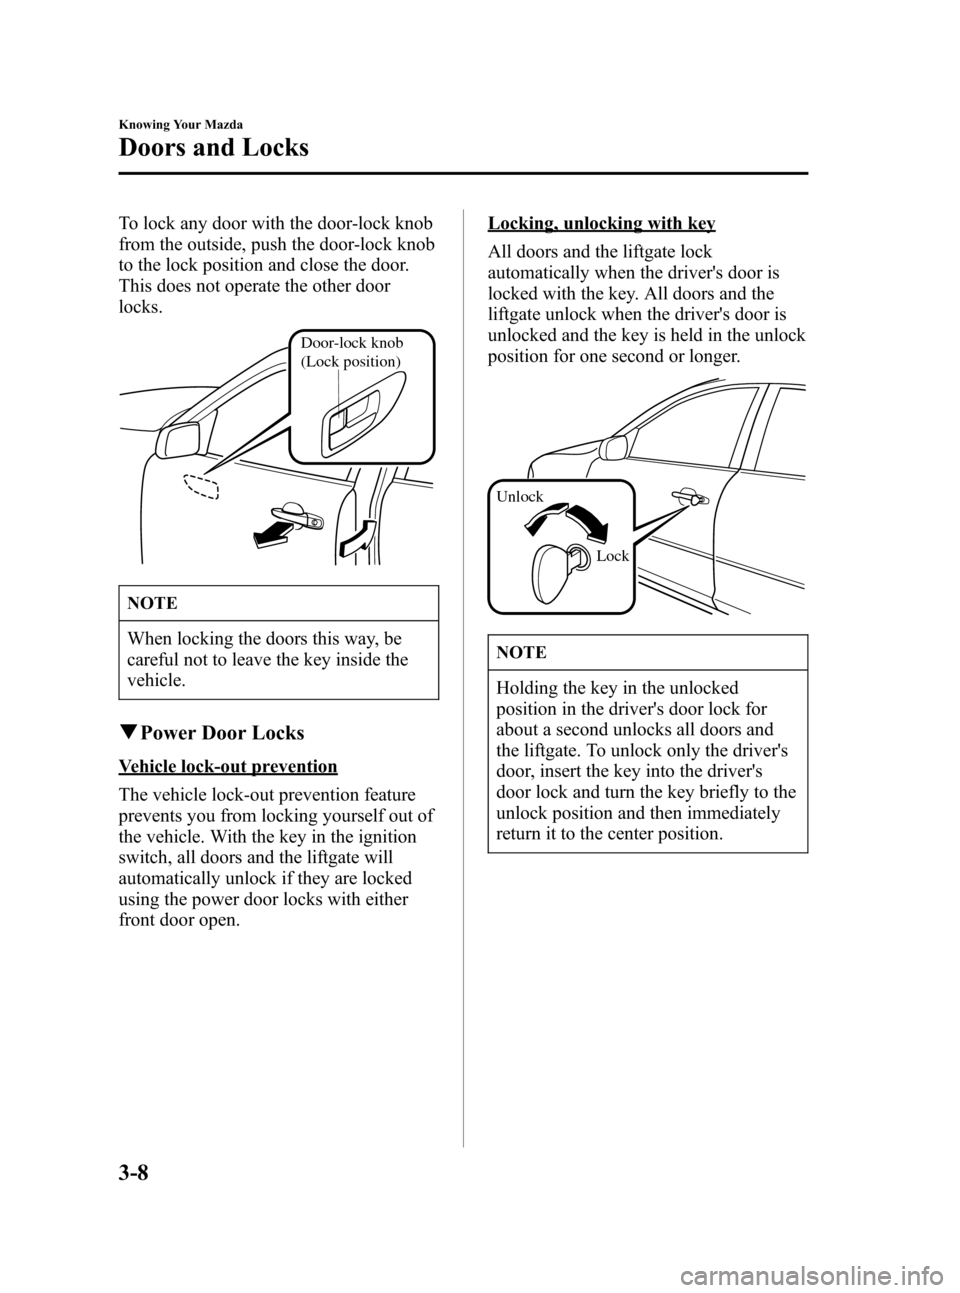 MAZDA MODEL 3 HATCHBACK 2006   (in English) Manual PDF Black plate (78,1)
To lock any door with the door-lock knob
from the outside, push the door-lock knob
to the lock position and close the door.
This does not operate the other door
locks.
Door-lock kno